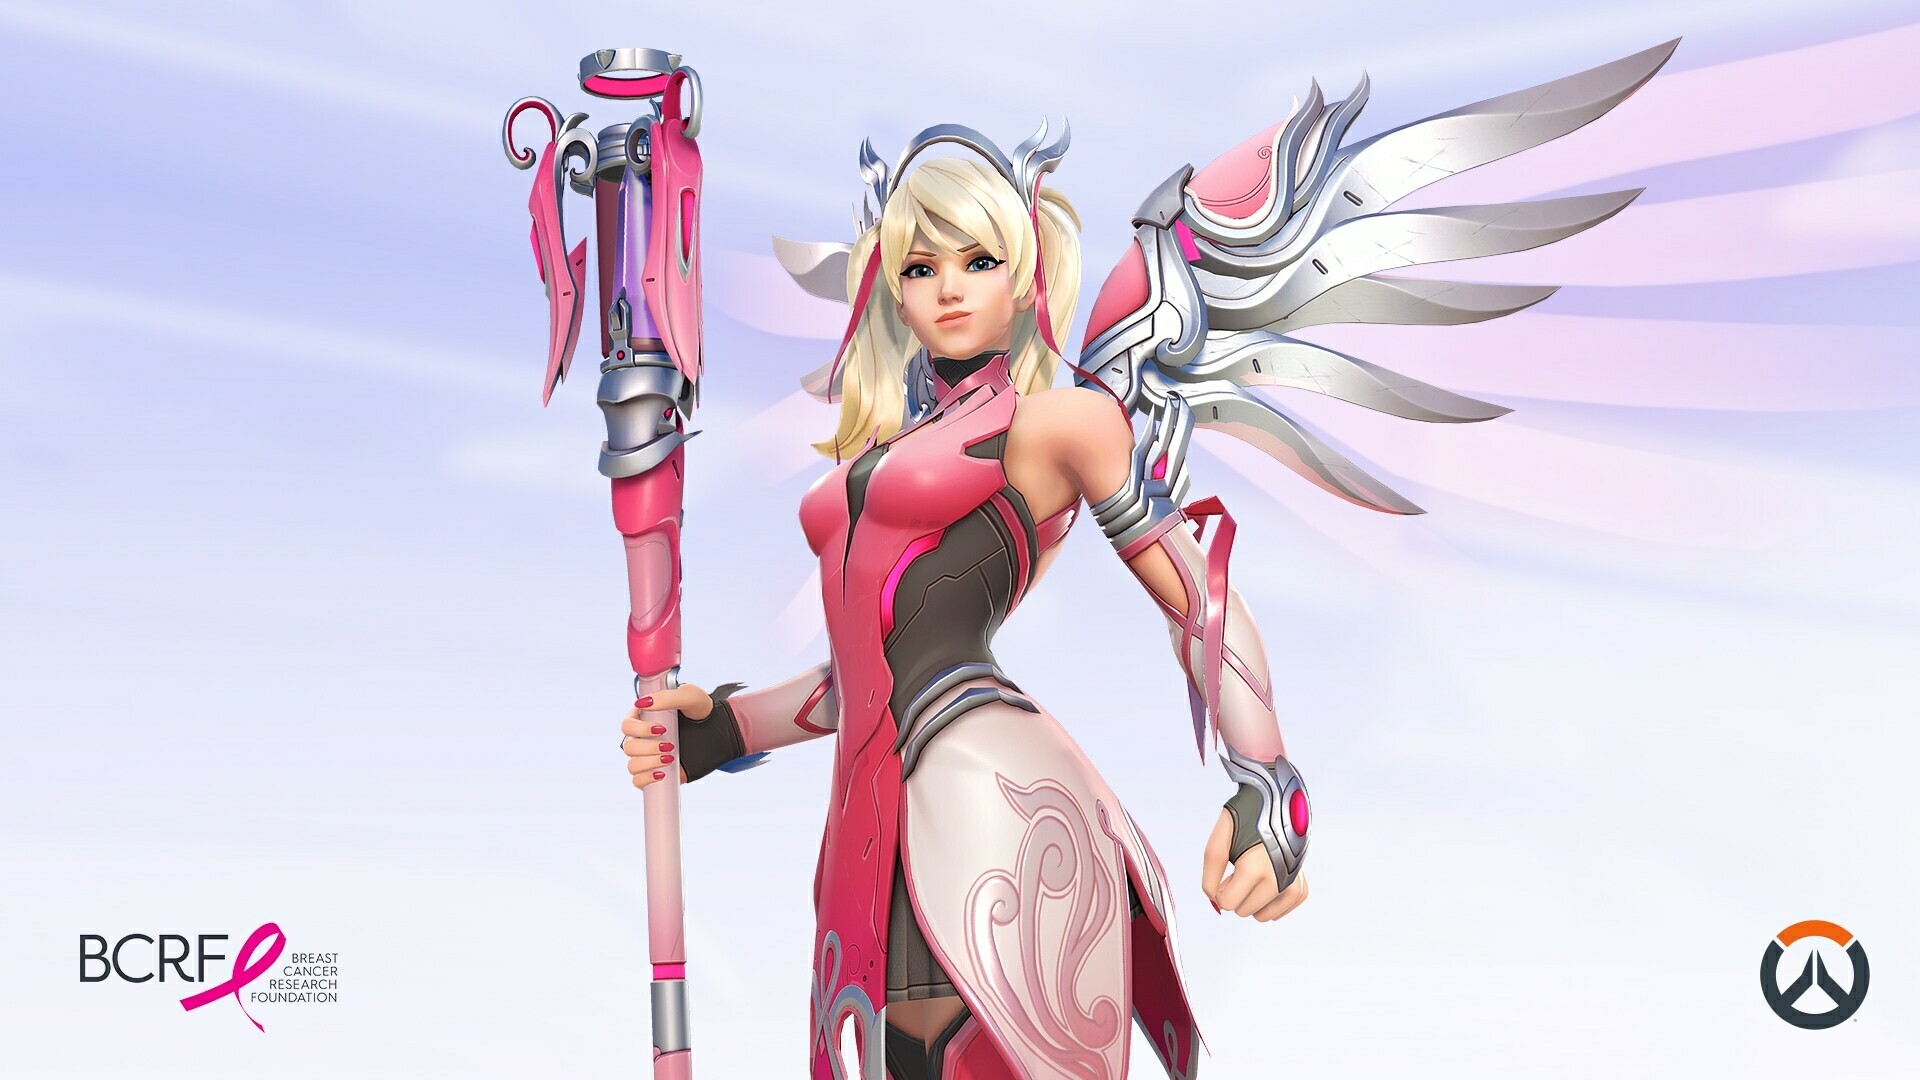 'Overwatch' 'Return' Charity Event: Pink Mercy Skin Supports Breast Cancer Research